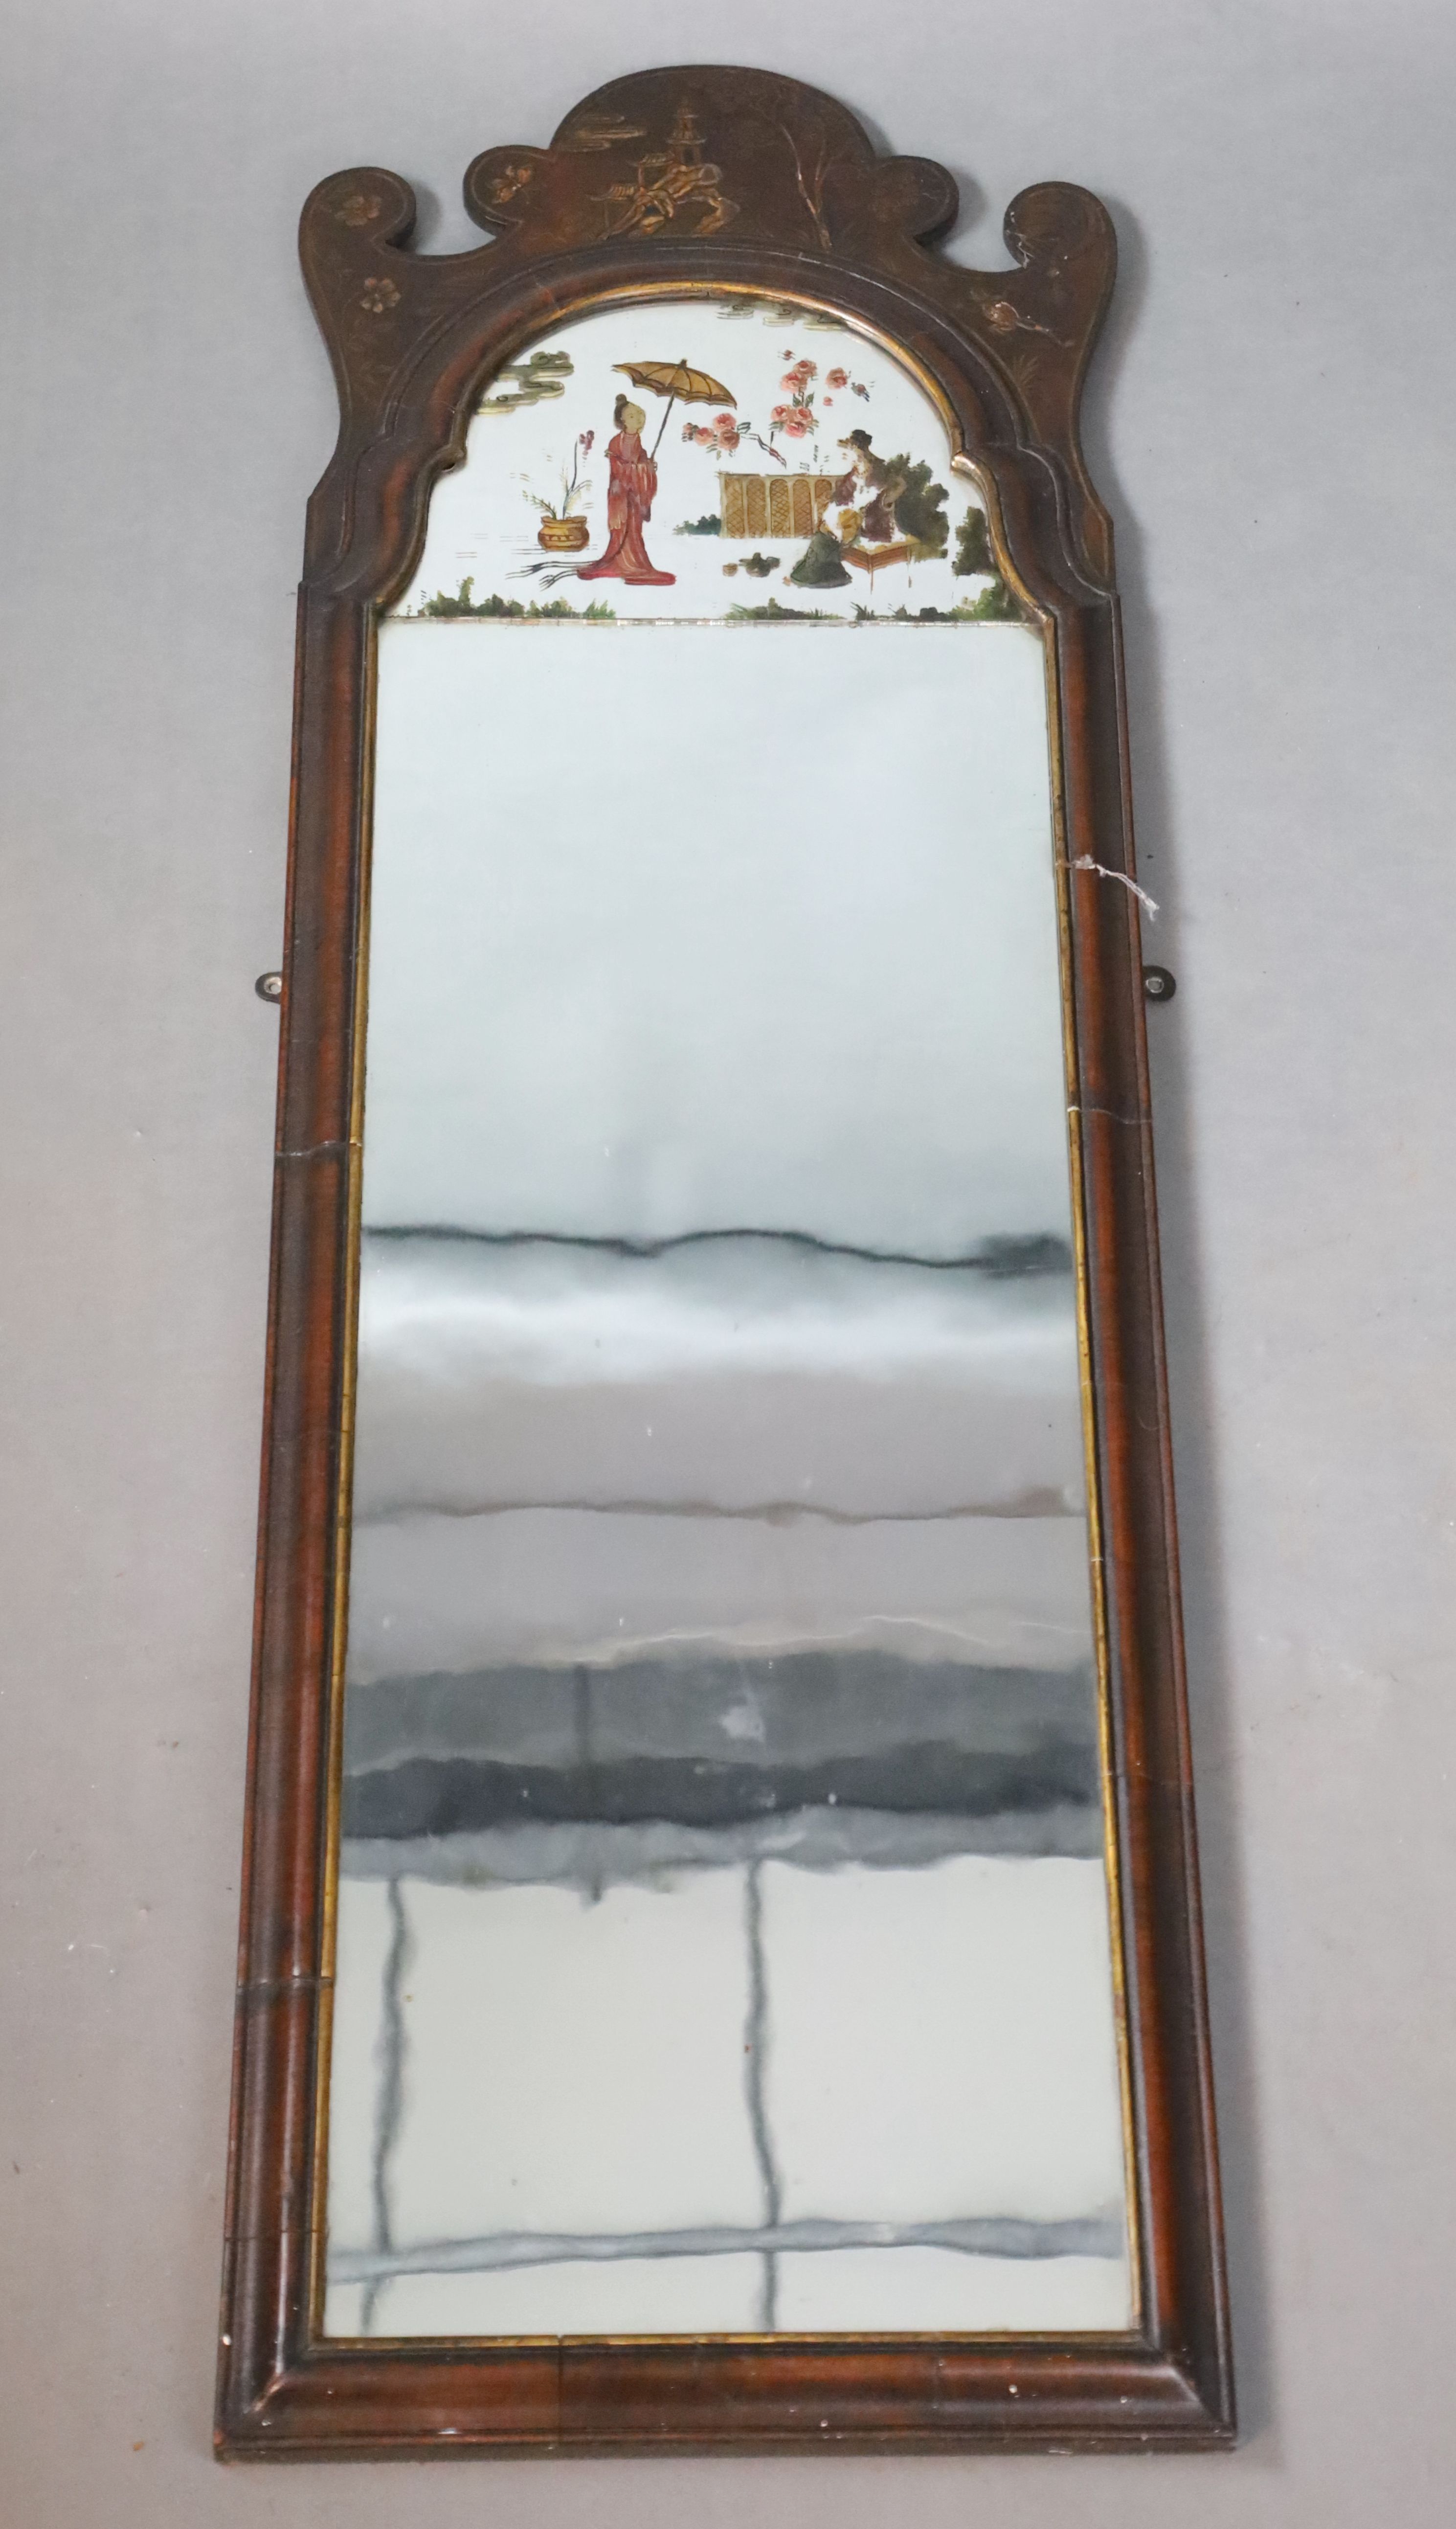 An early 18th century style chinoiserie lacquered walnut wall mirror, with chinoiserie painted glass